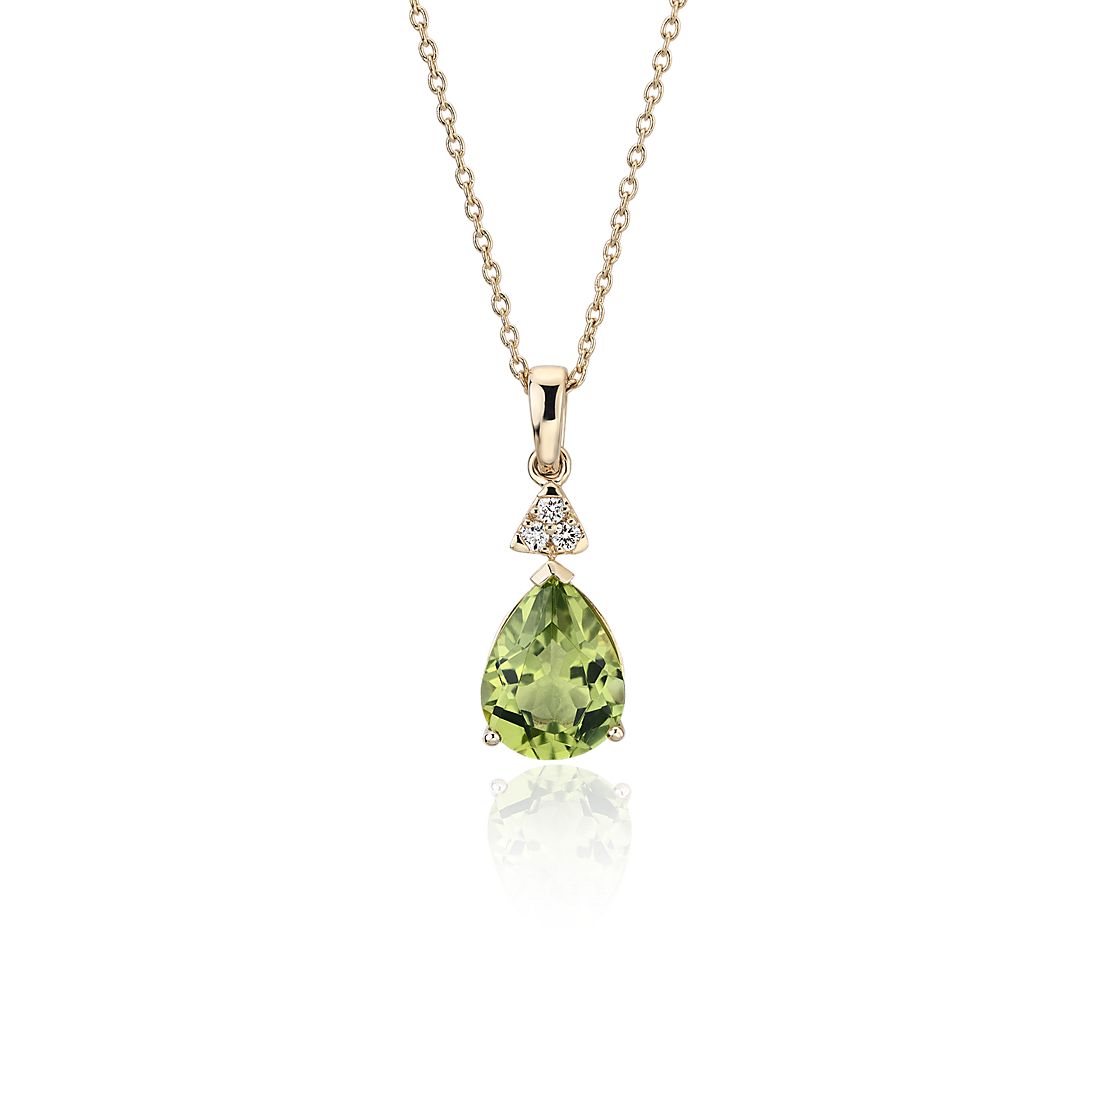 Details about   Lovely Green Peridot Gemstone Pendant 1.24 Ct Oval Shape 18k Rose Gold Jewelry